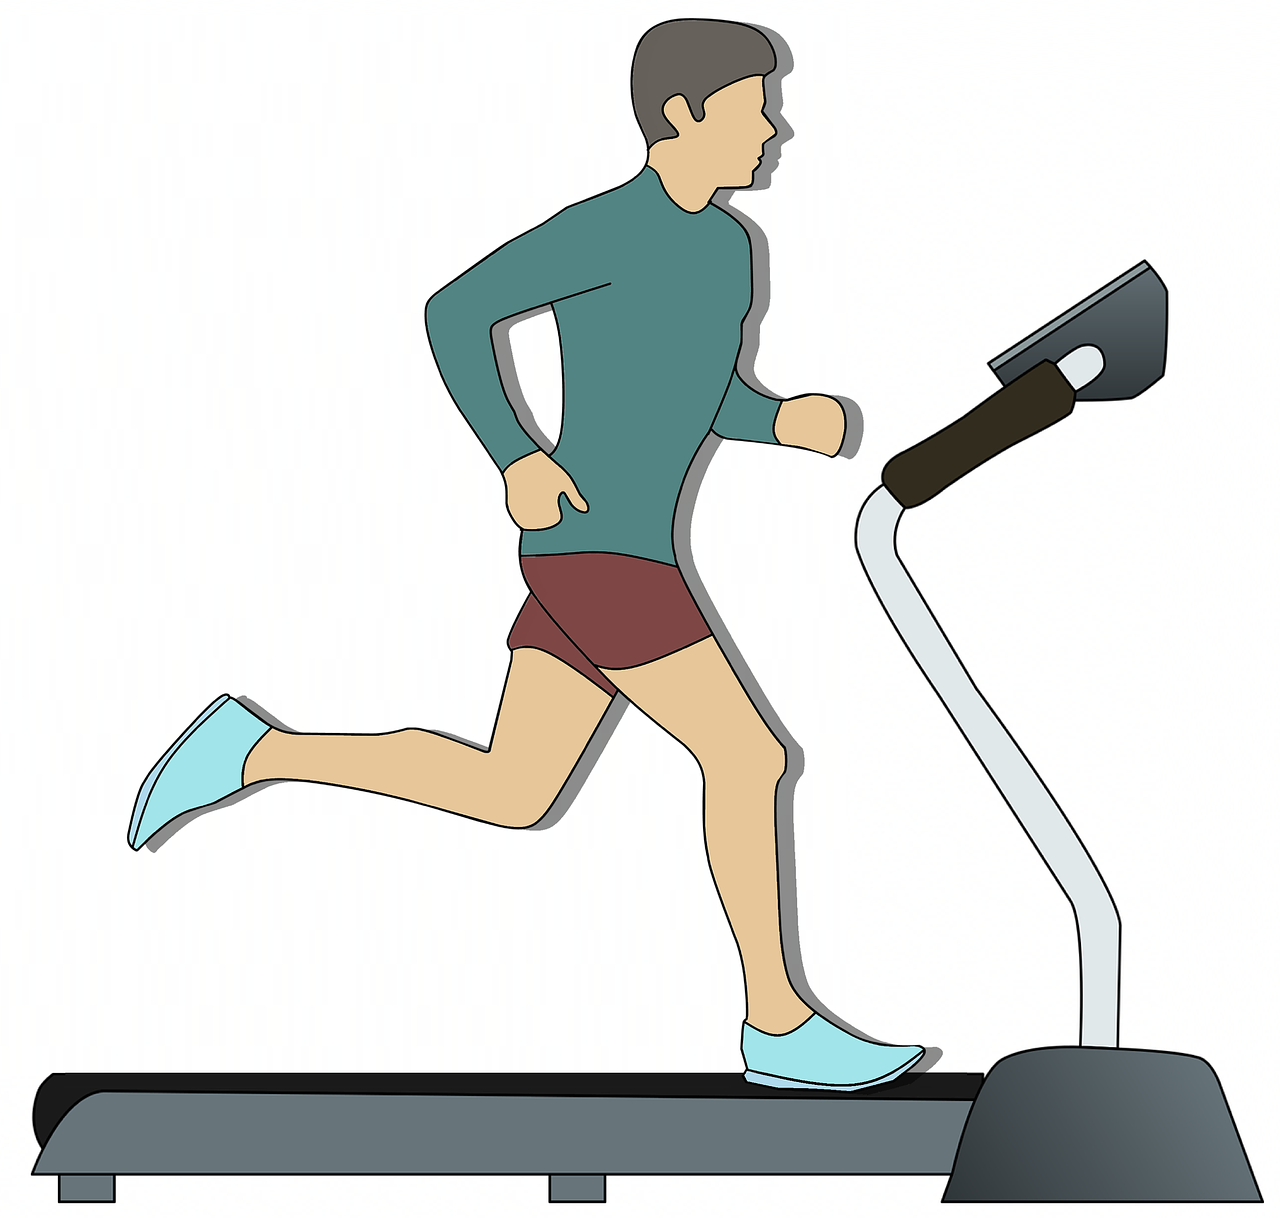 CAN I DO A 7-MINUTE MILE ON THE TREADMILL